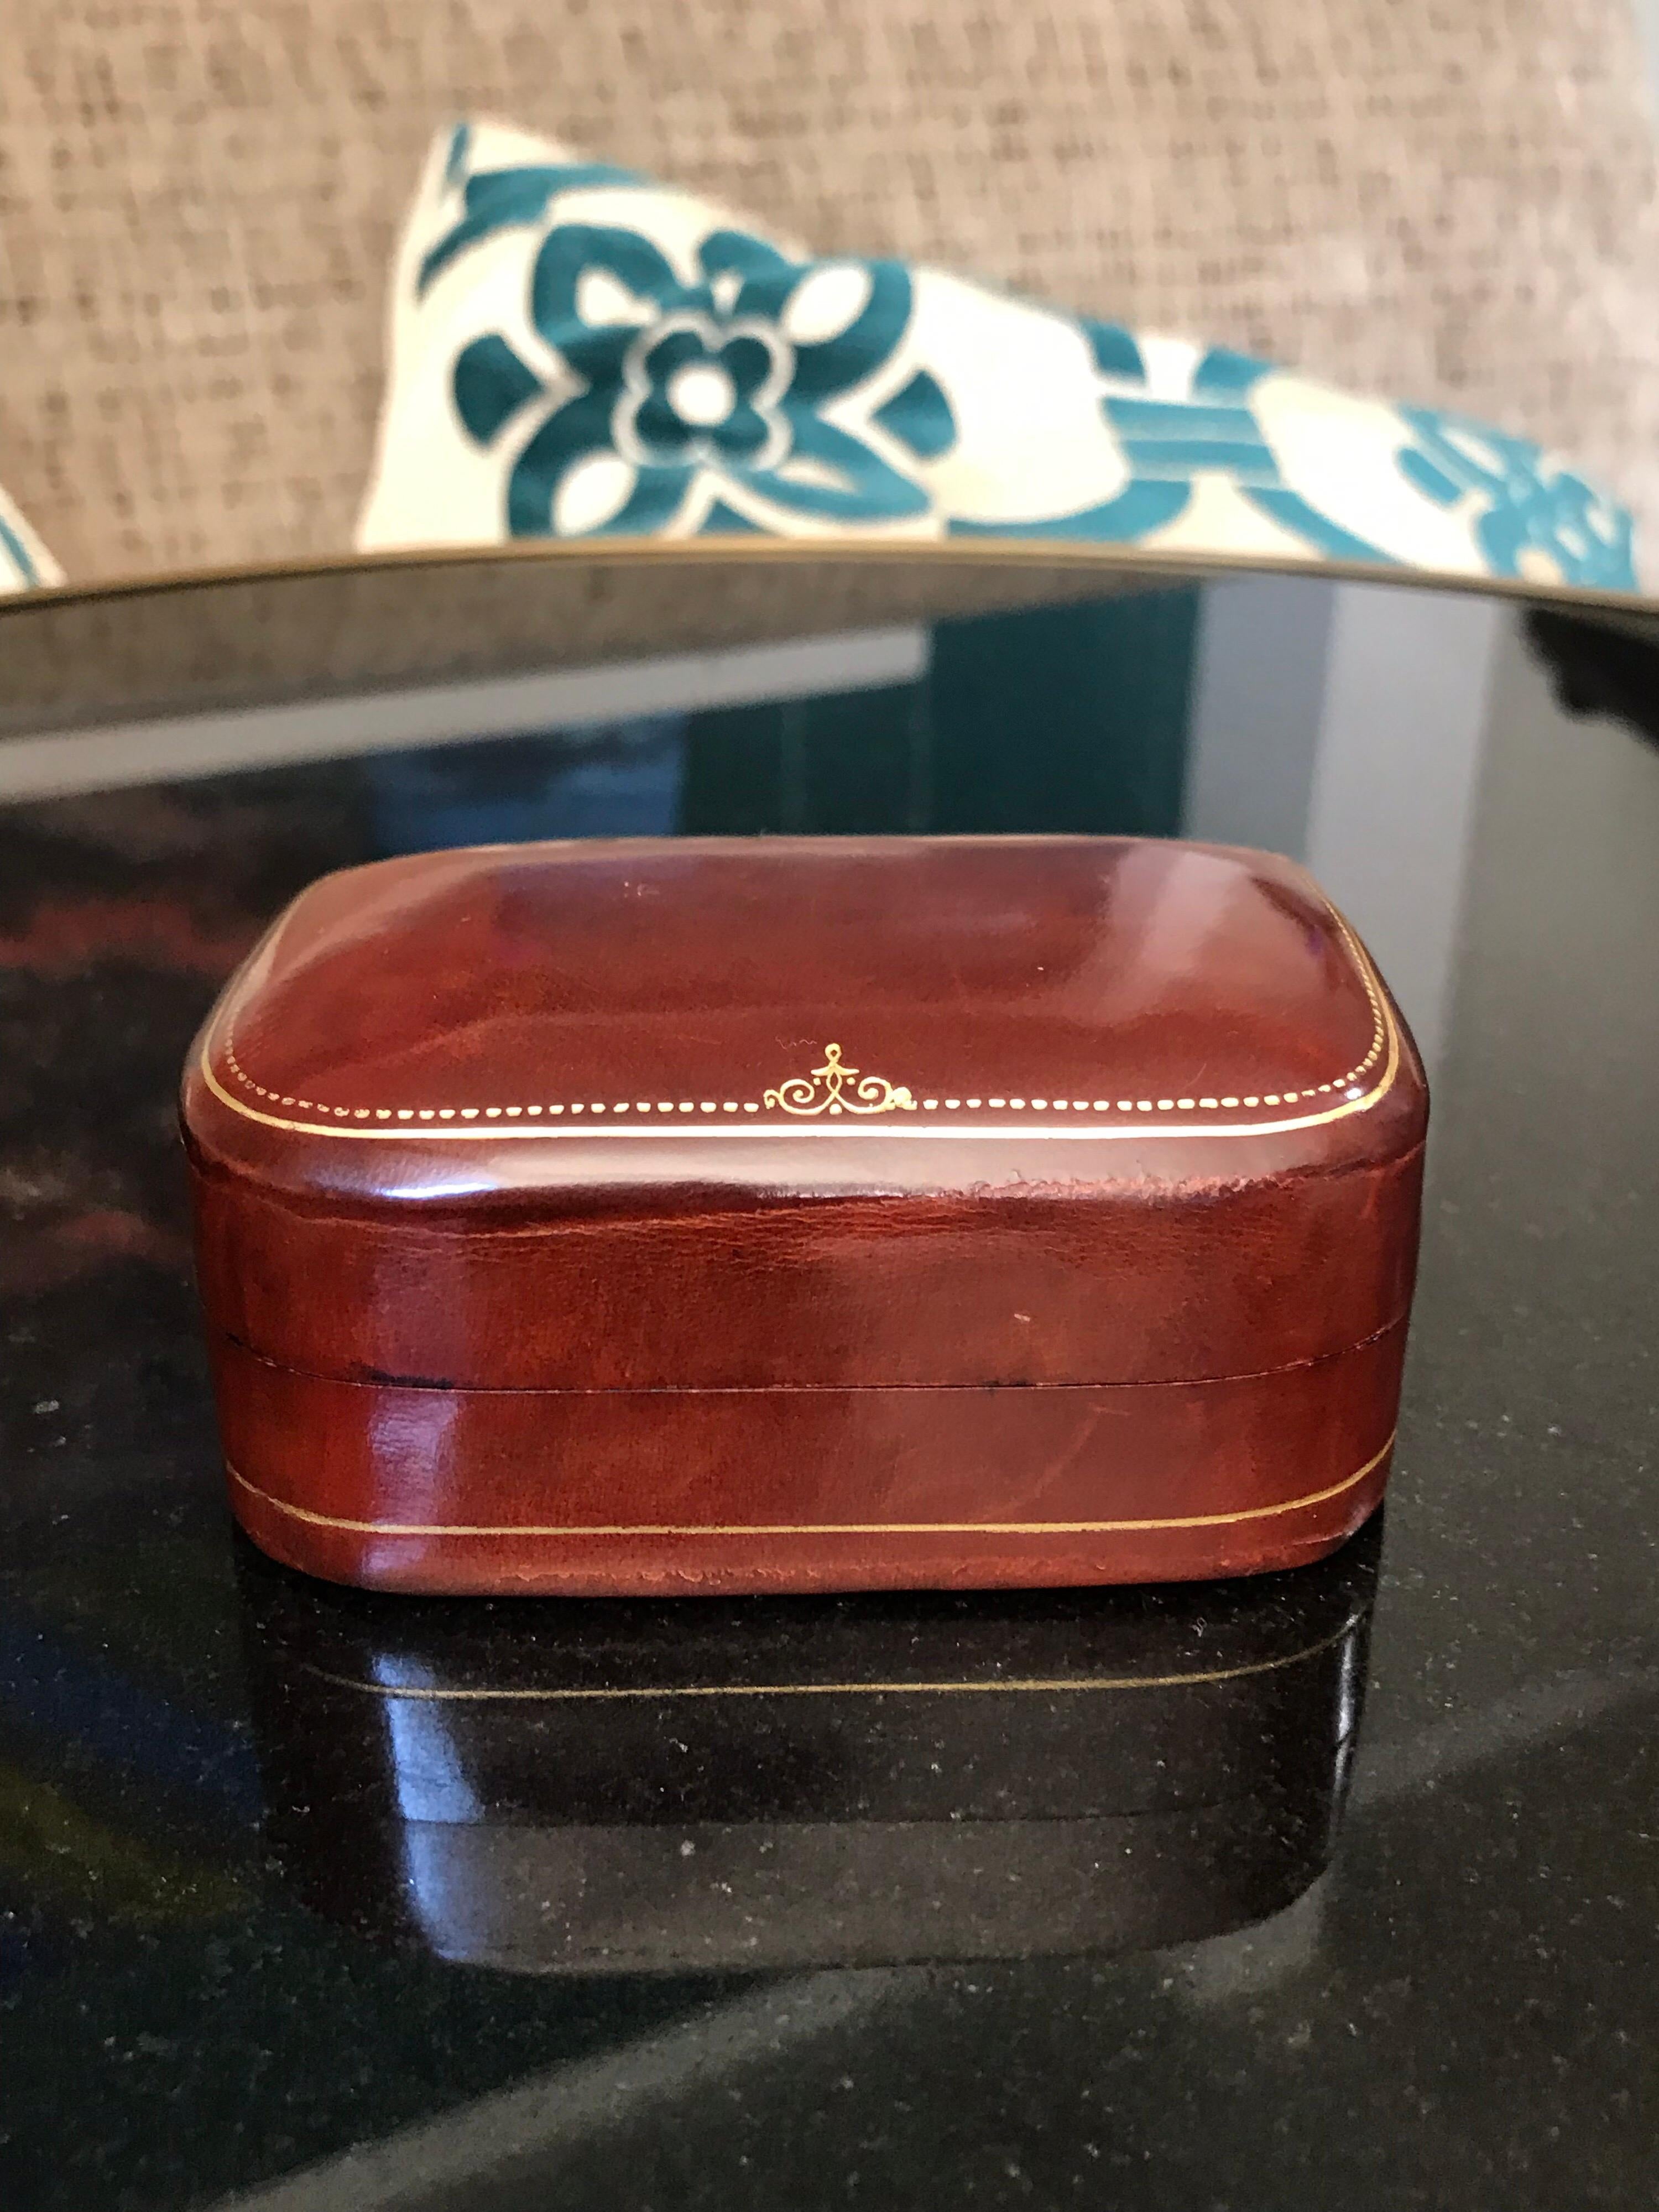 A supple and rich vintage Italian calfskin jewelry box having a back sewn hinge and gilt embossed details all around it. Earrings, cufflinks or what have you, this stylish little storage box will be loved for years to come. Very tactile feeling and